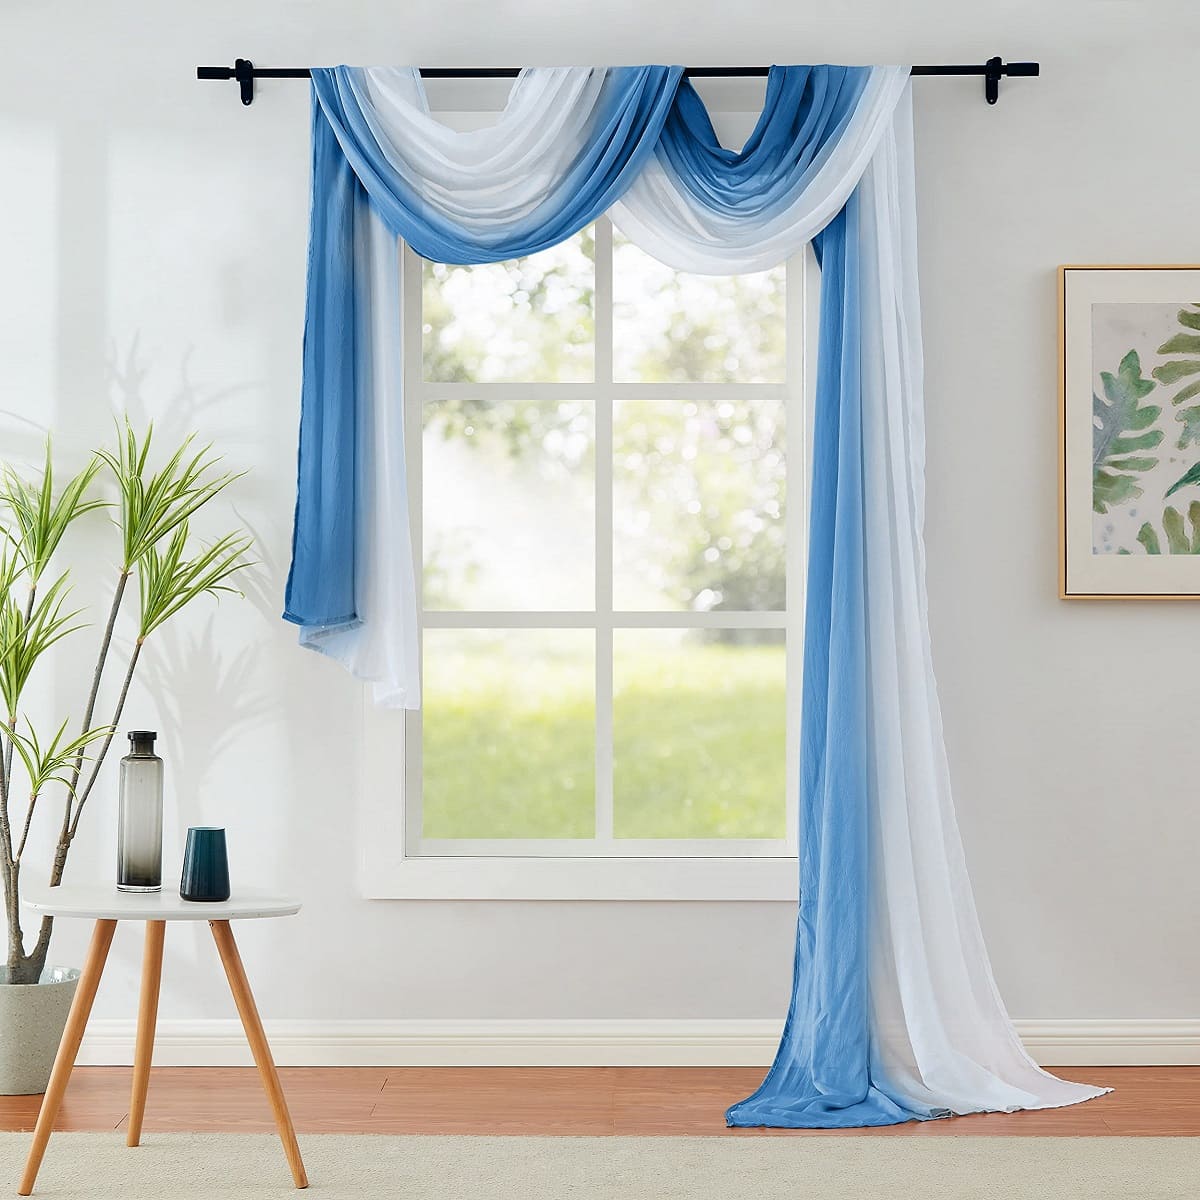 15 Amazing Scarf Valances For Windows for 2023